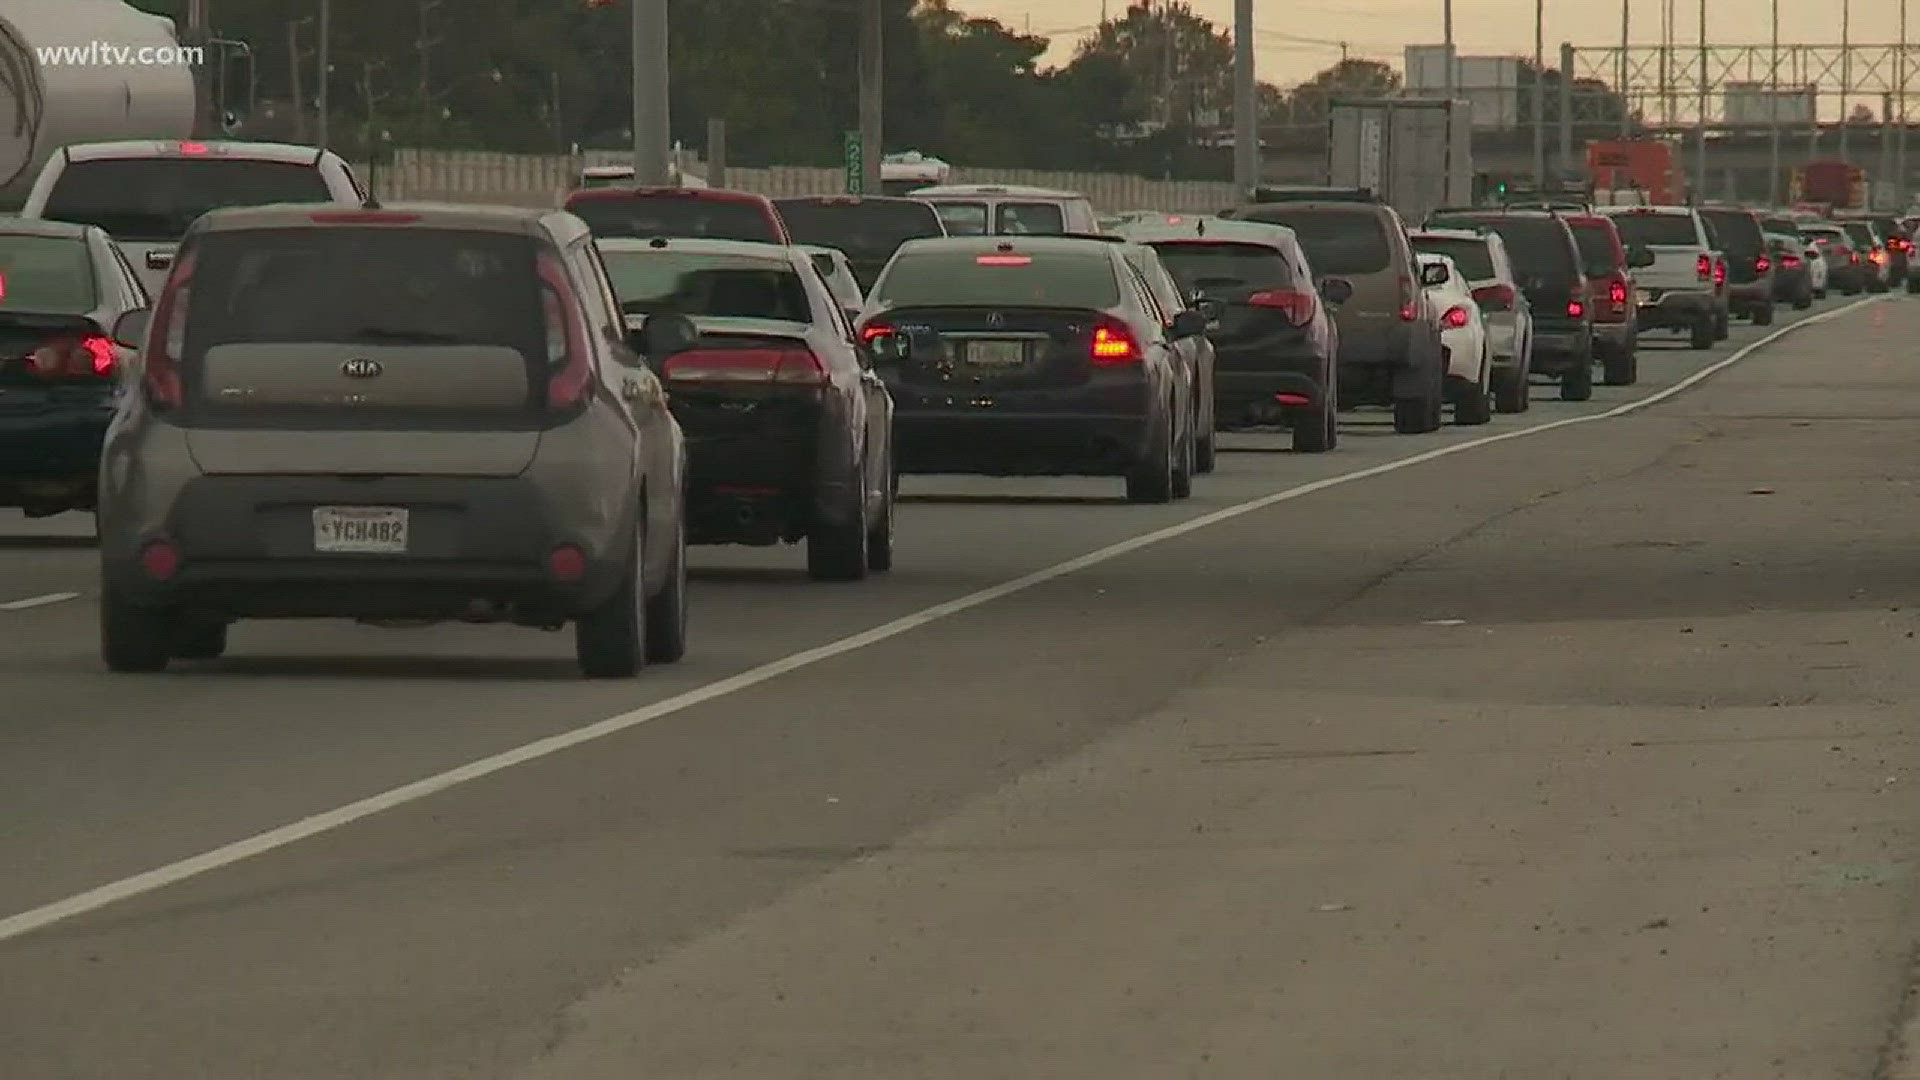 Drivers in Louisiana are about to see their car insurance rates go up again. It's happening all across the country, but Louisiana is especially hard hit. The news didn't go over well with drivers on Tuesday.